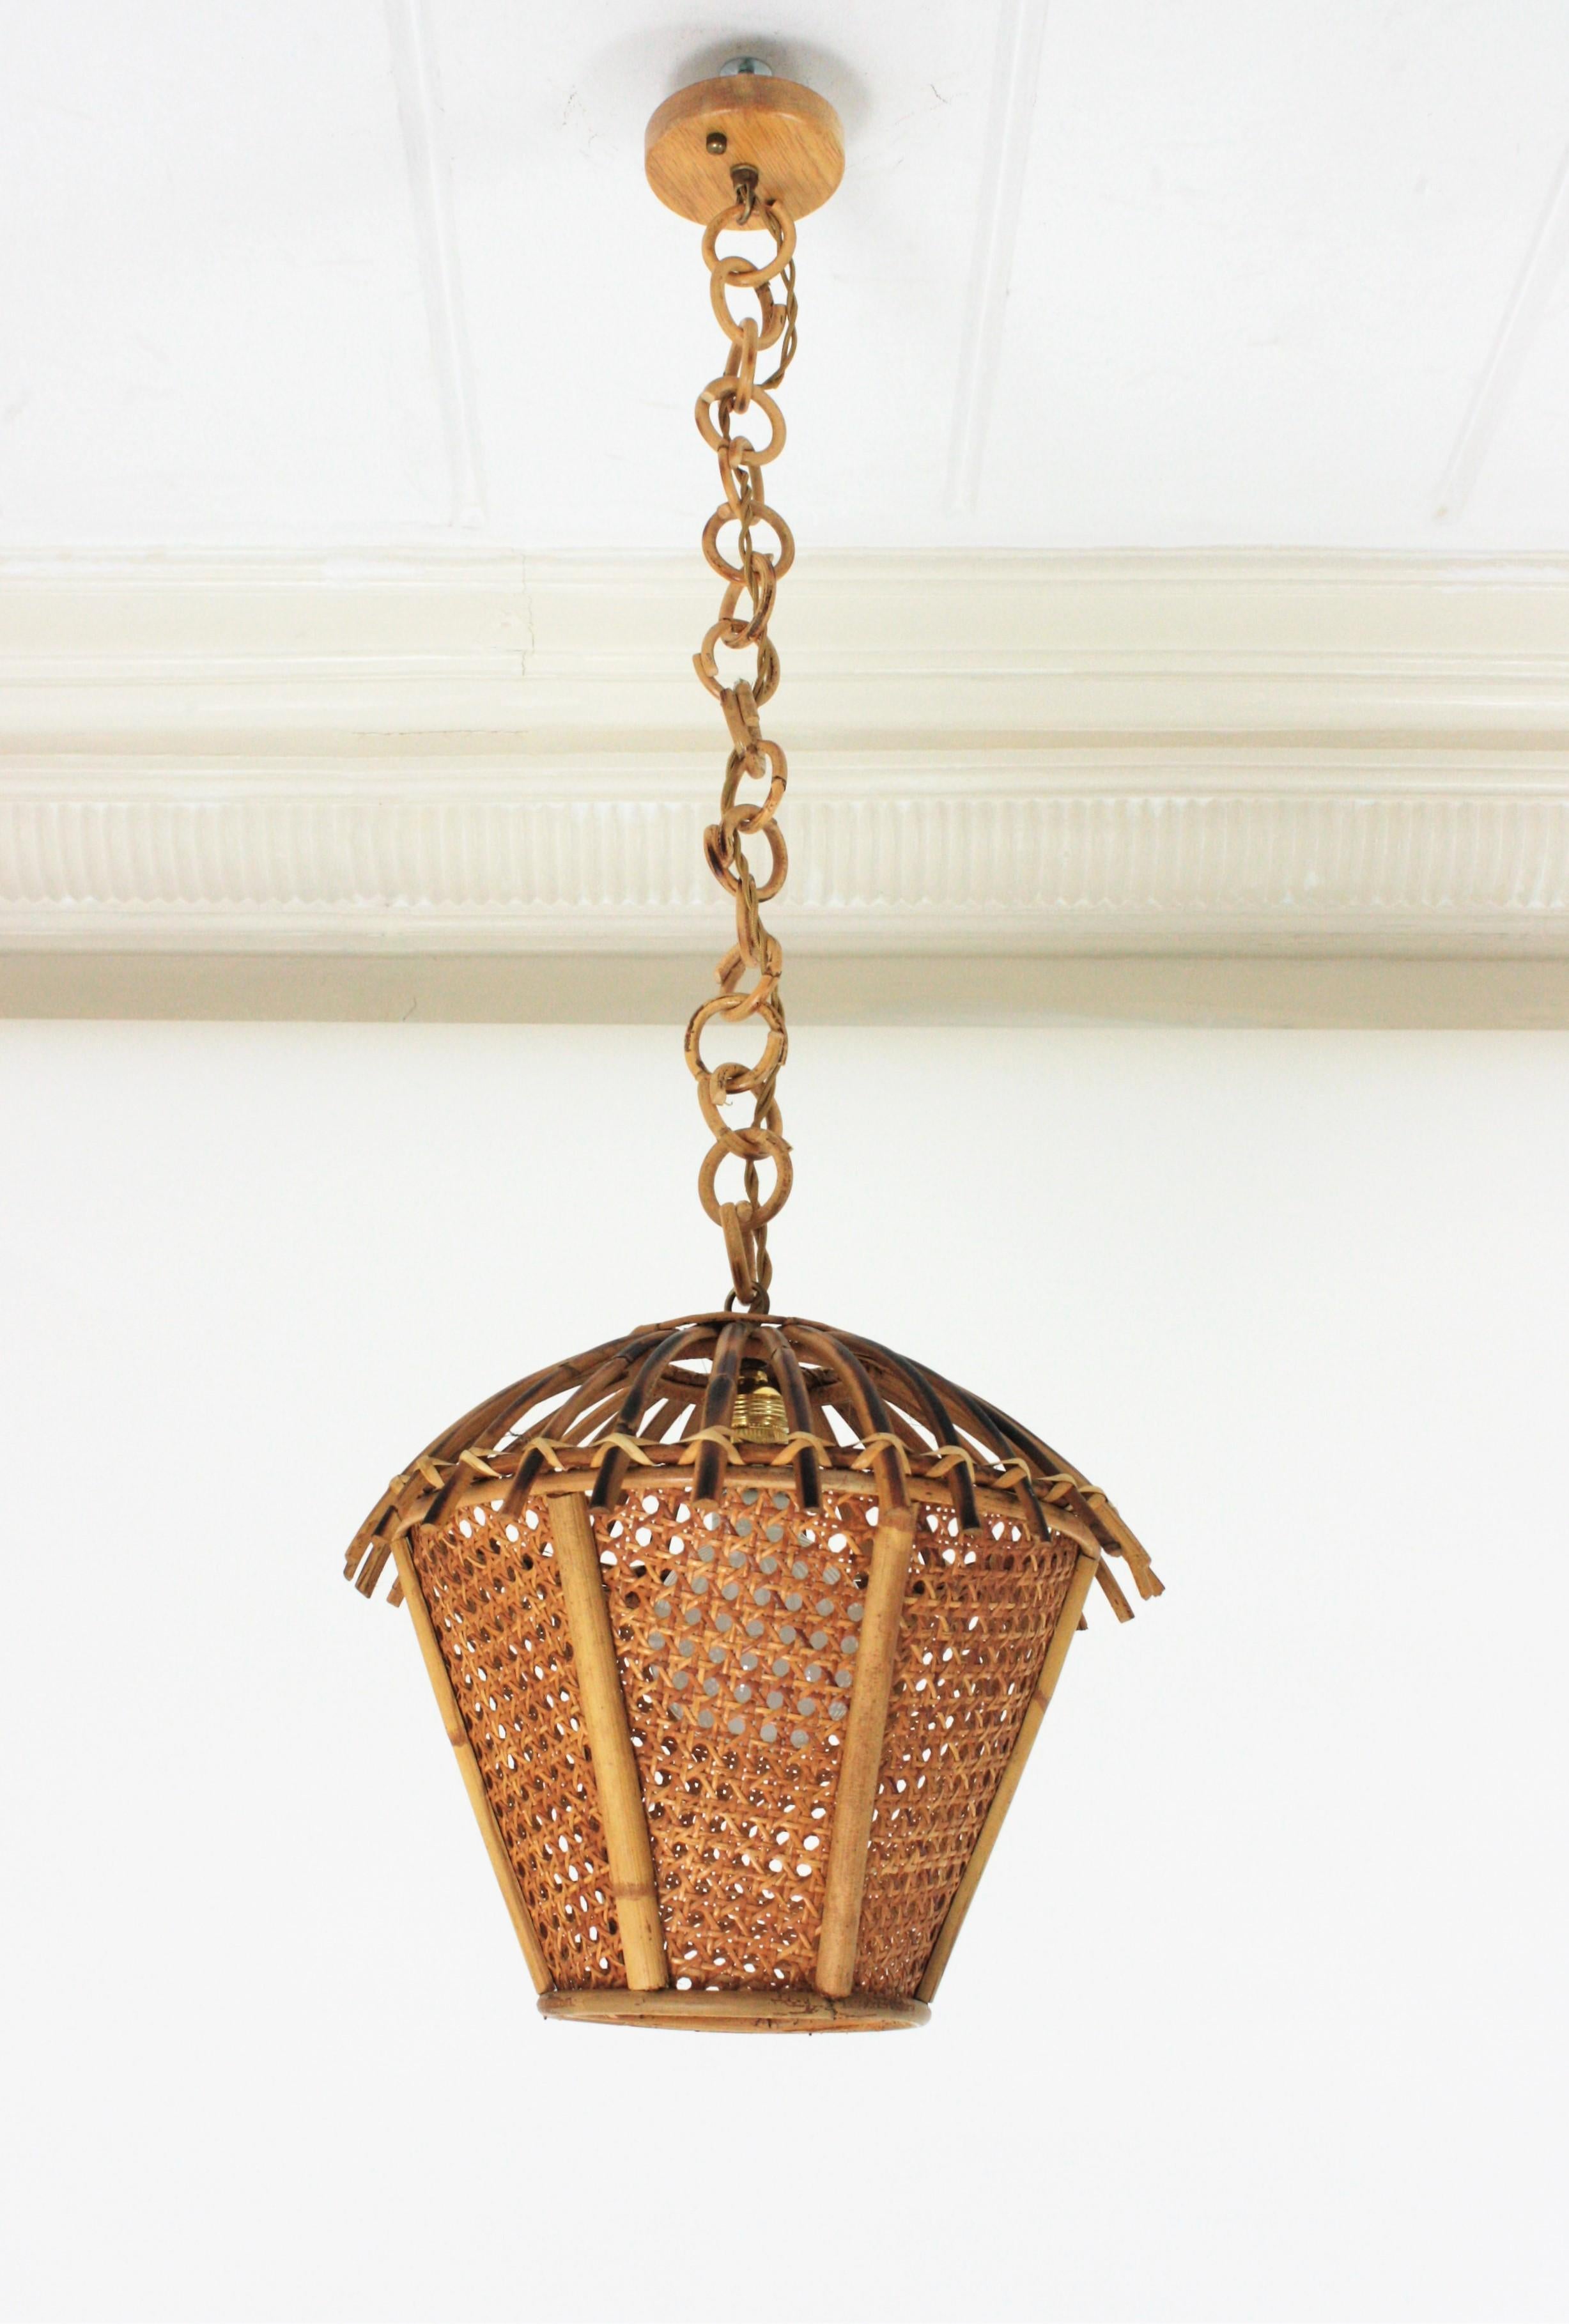 Mid-Century Modern woven wicker and rattan pagoda shaped lantern or pendant ceiling lamp. Italy, 1960s.
This pendant light features a woven wicker shade with rattan canes on the top. It has an eye-catching design as a pagoda combining Midcentury